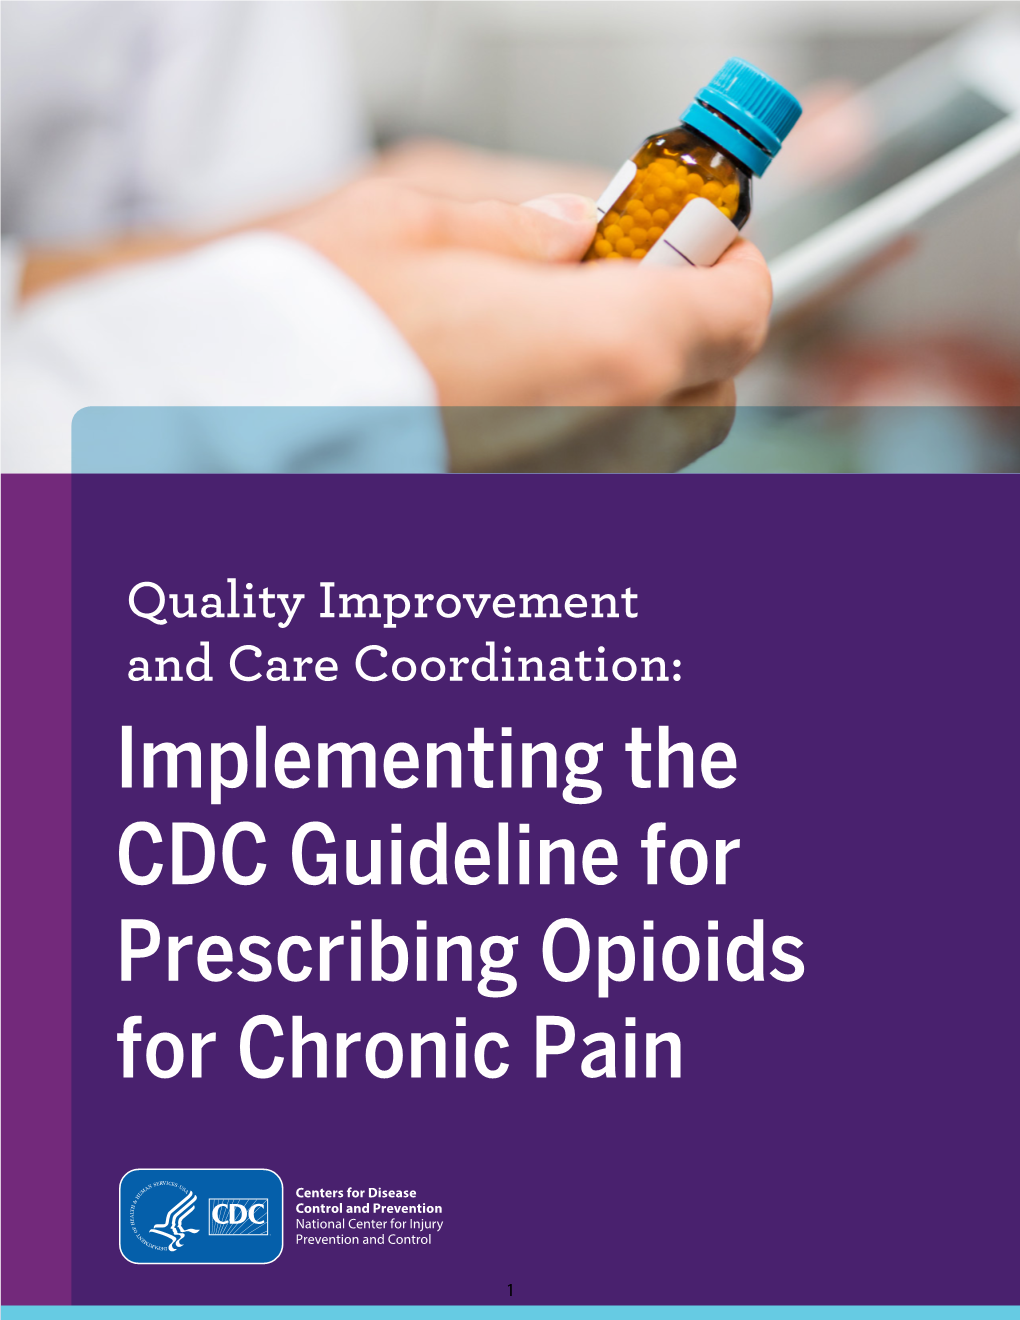 Quality Improvement and Care Coordination: Implementing the CDC Guideline for Prescribing Opioids for Chronic Pain